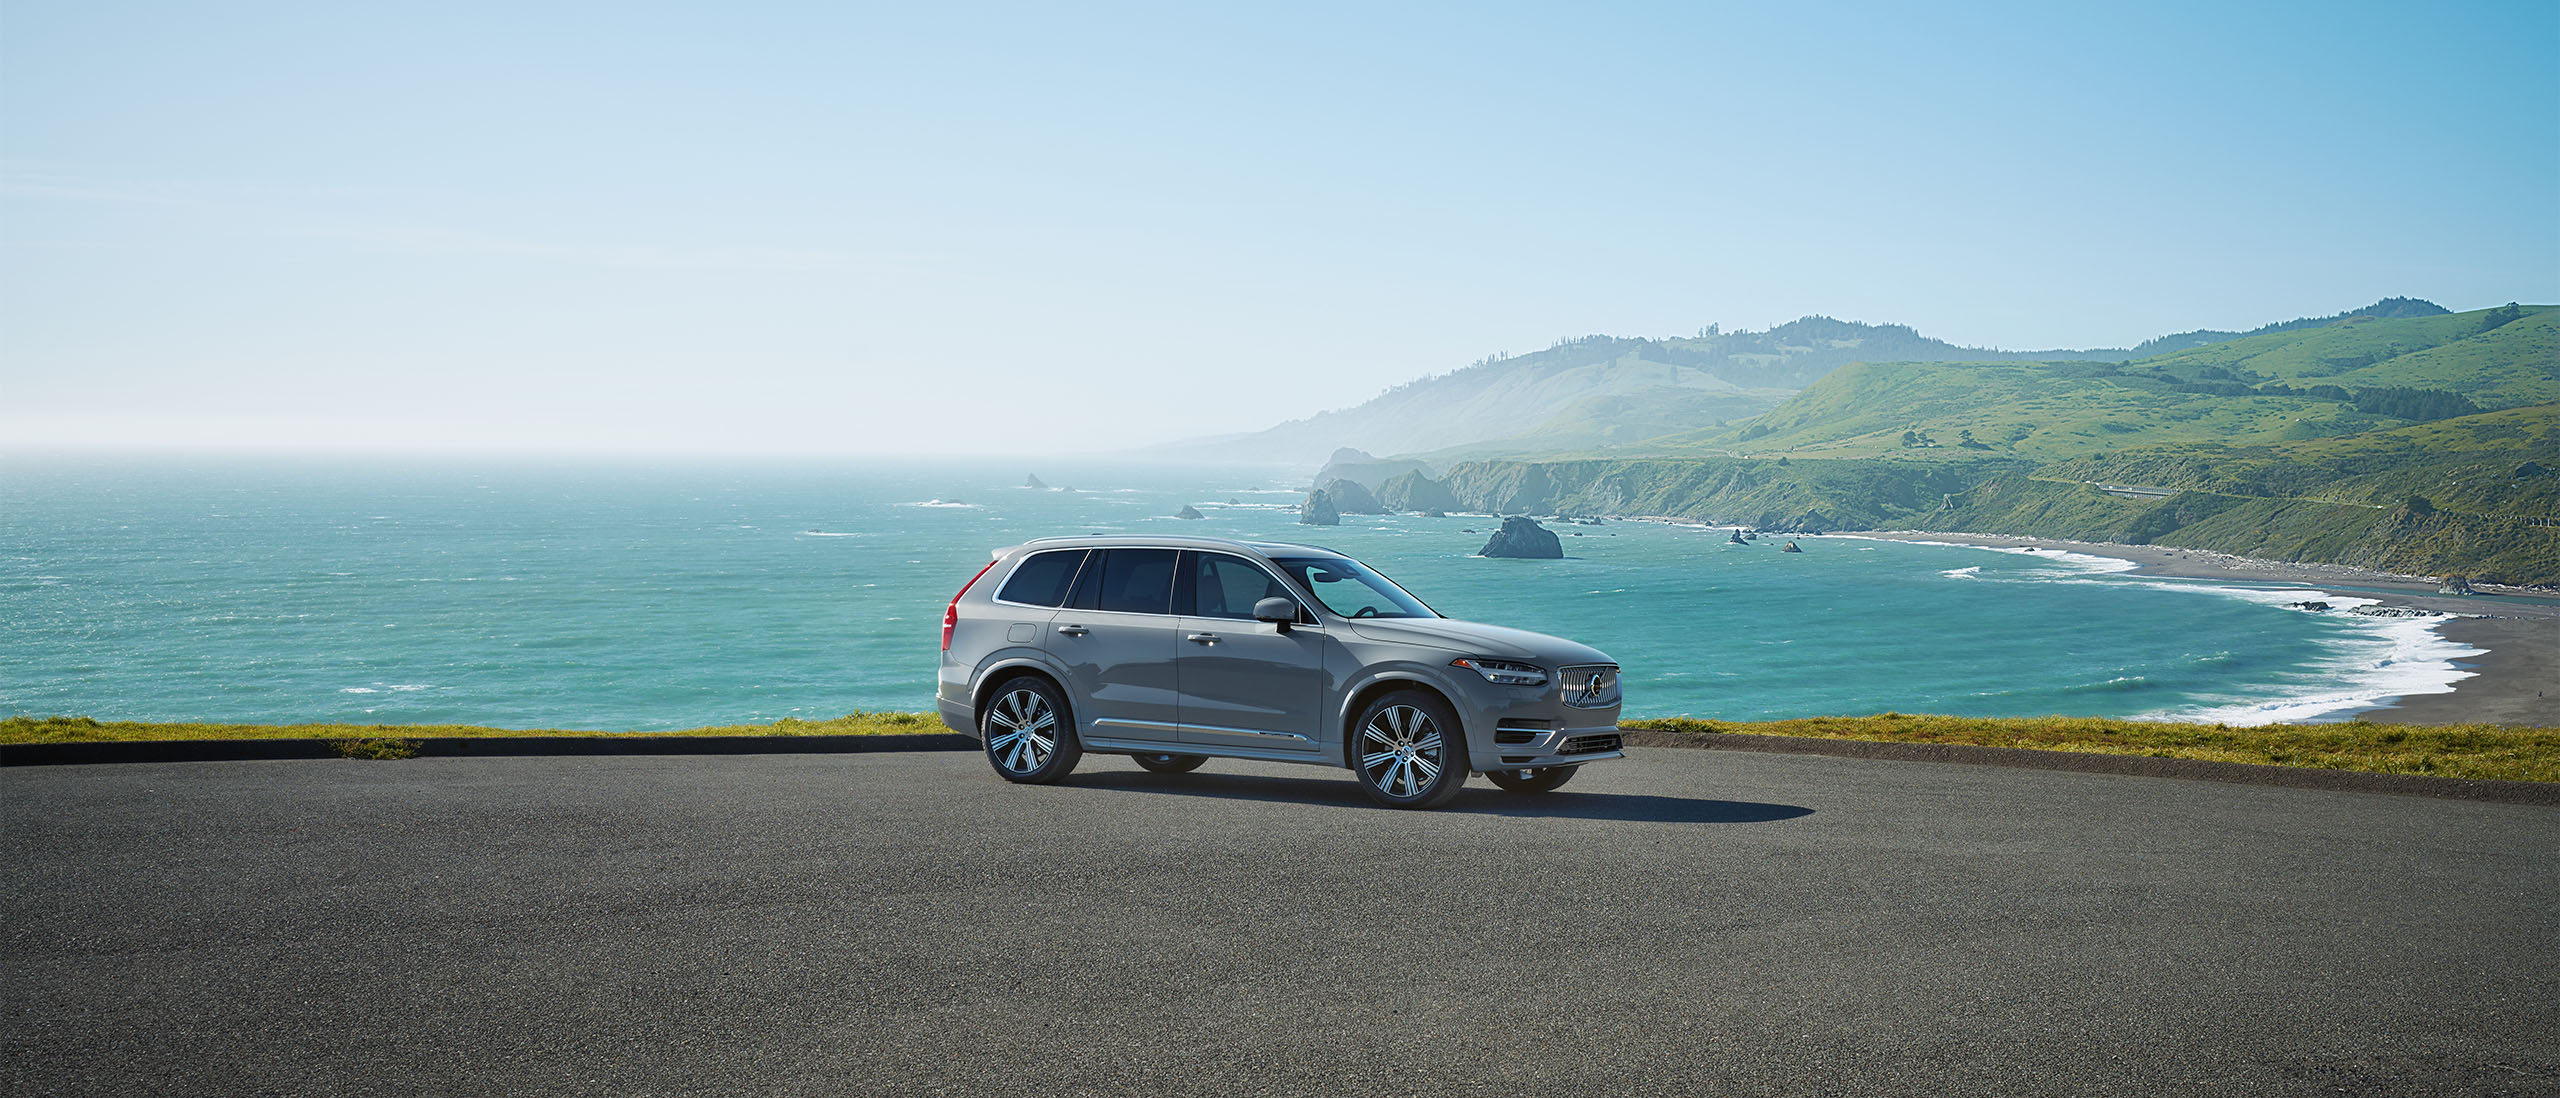 Volvo Offers - Summer Safely Saving Event  - XC90 plug-in hybrid SUV parked at beach  